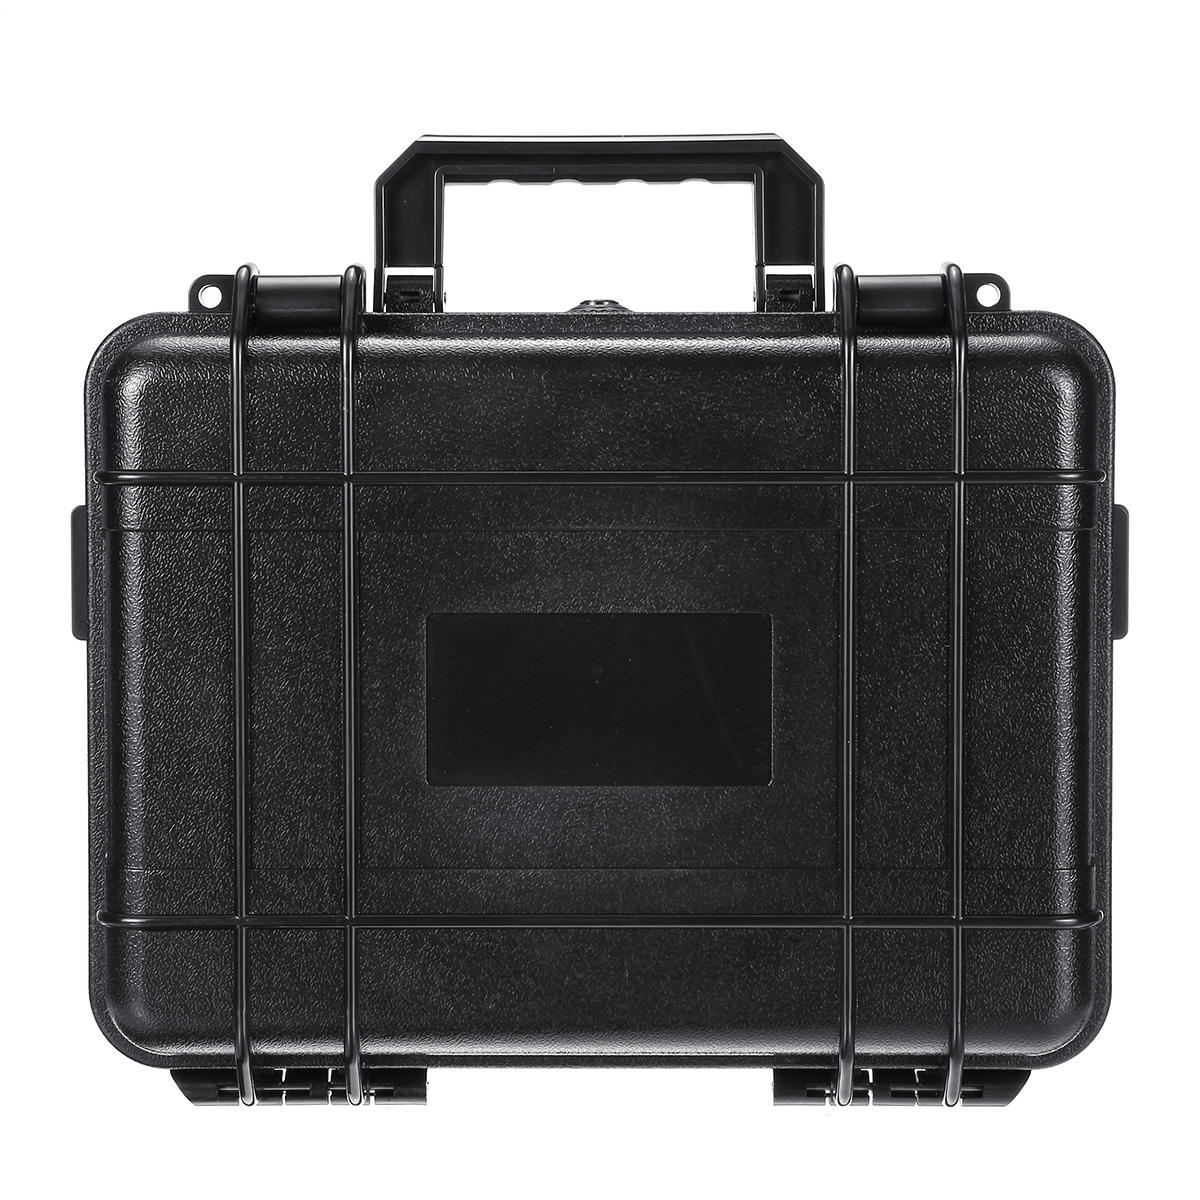 Outdoor Portable EDC Instrument Tool Kits Box Waterproof Shockproof Protective Safety Storage Case  